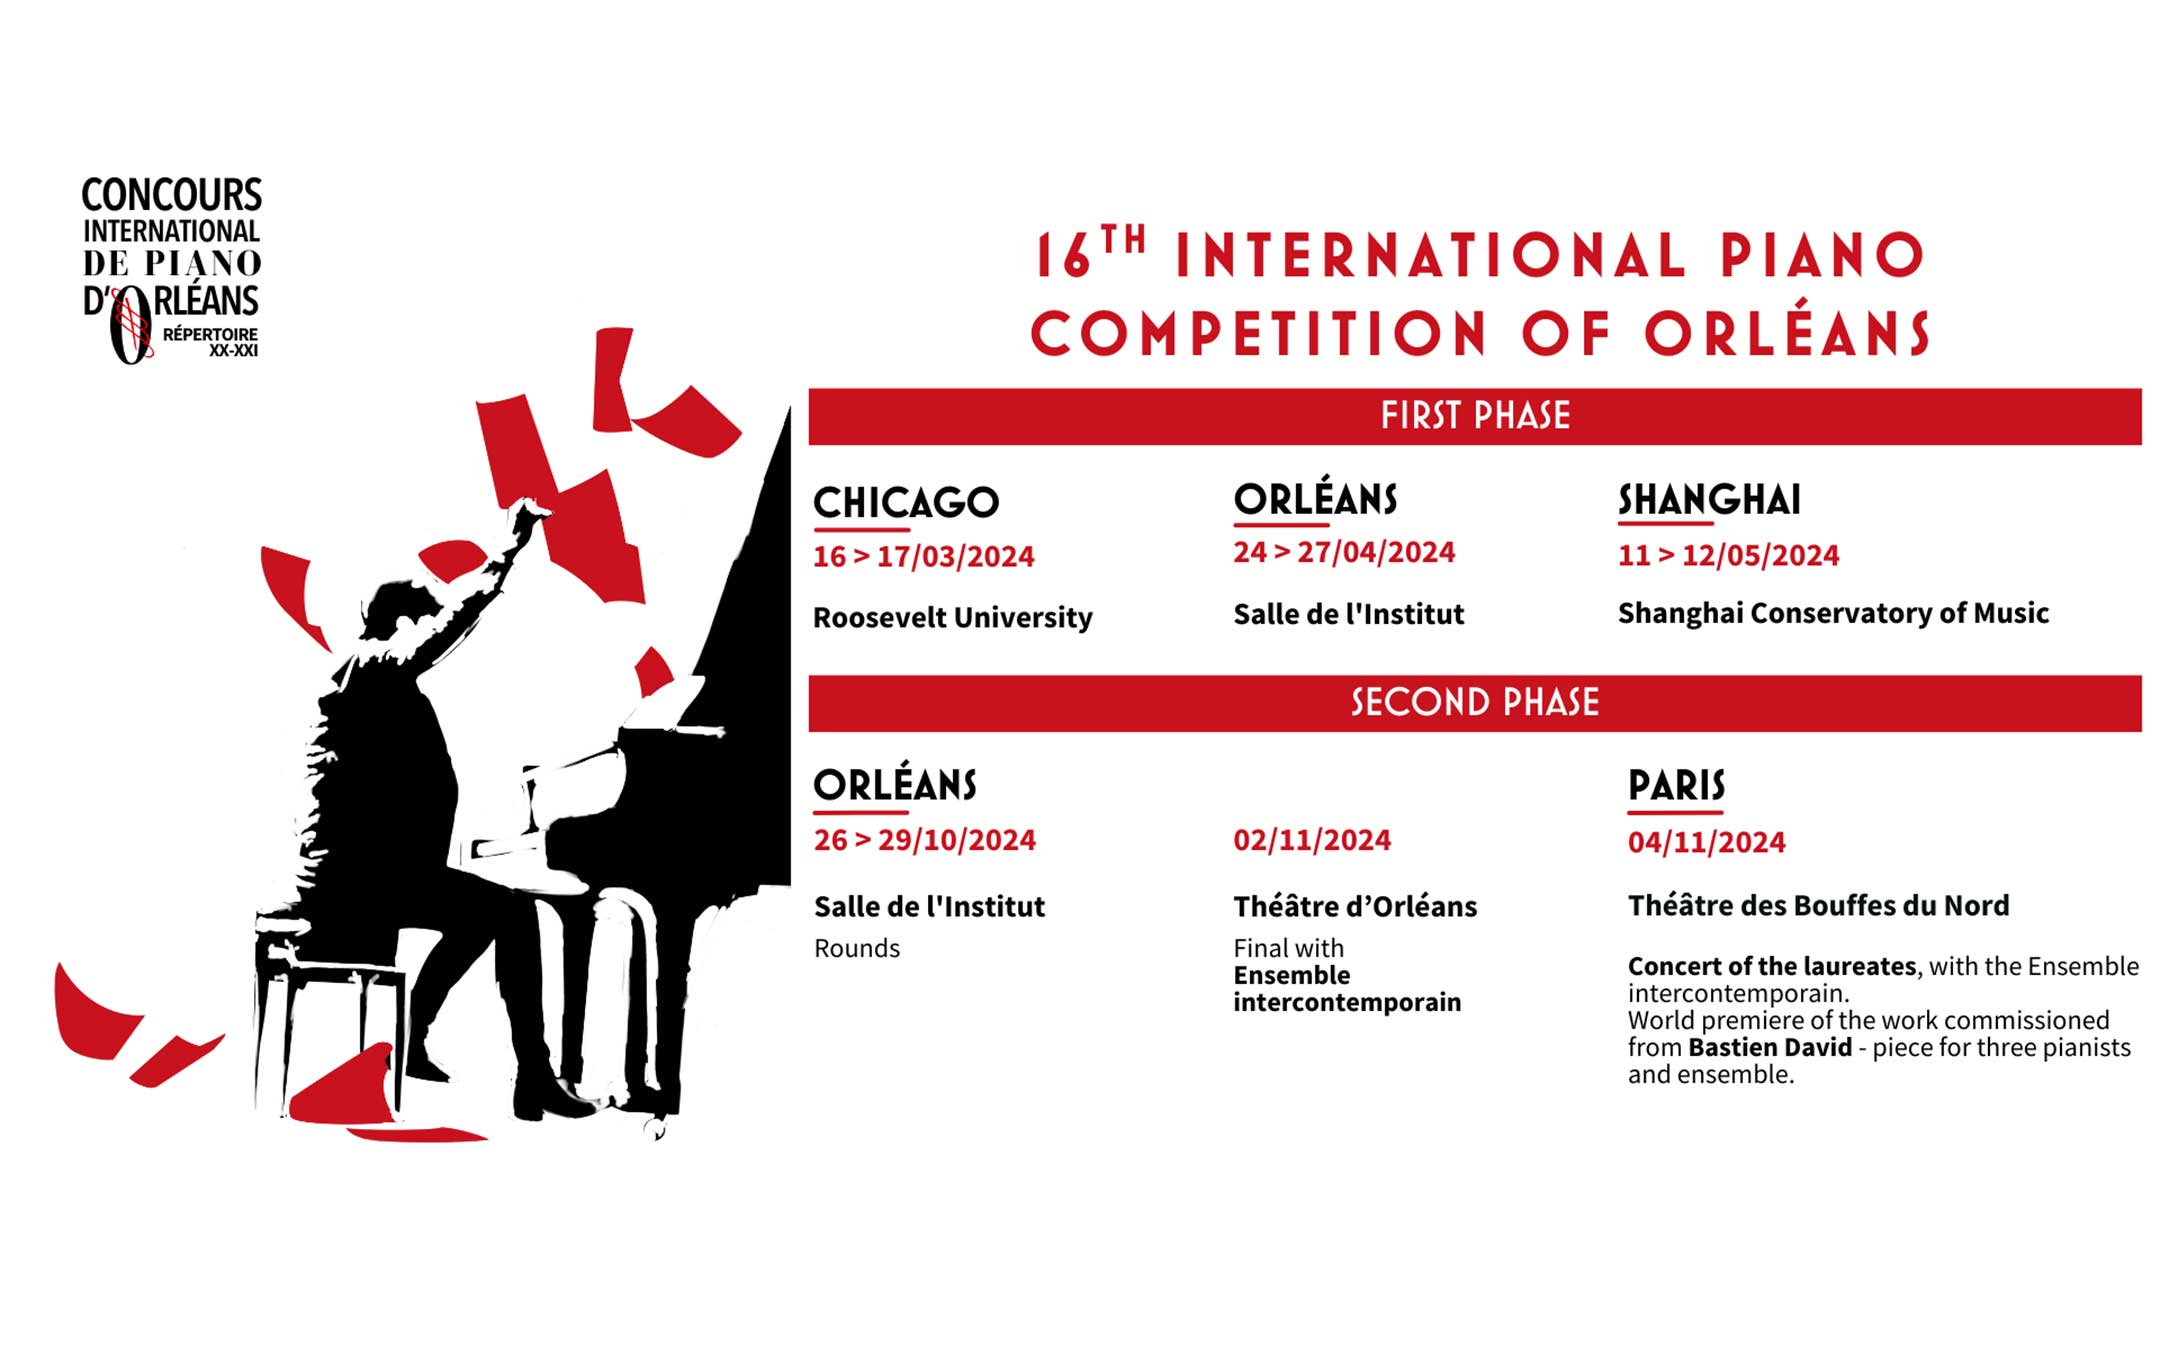 Schedule for the 16th International Piano Competition of Orleans